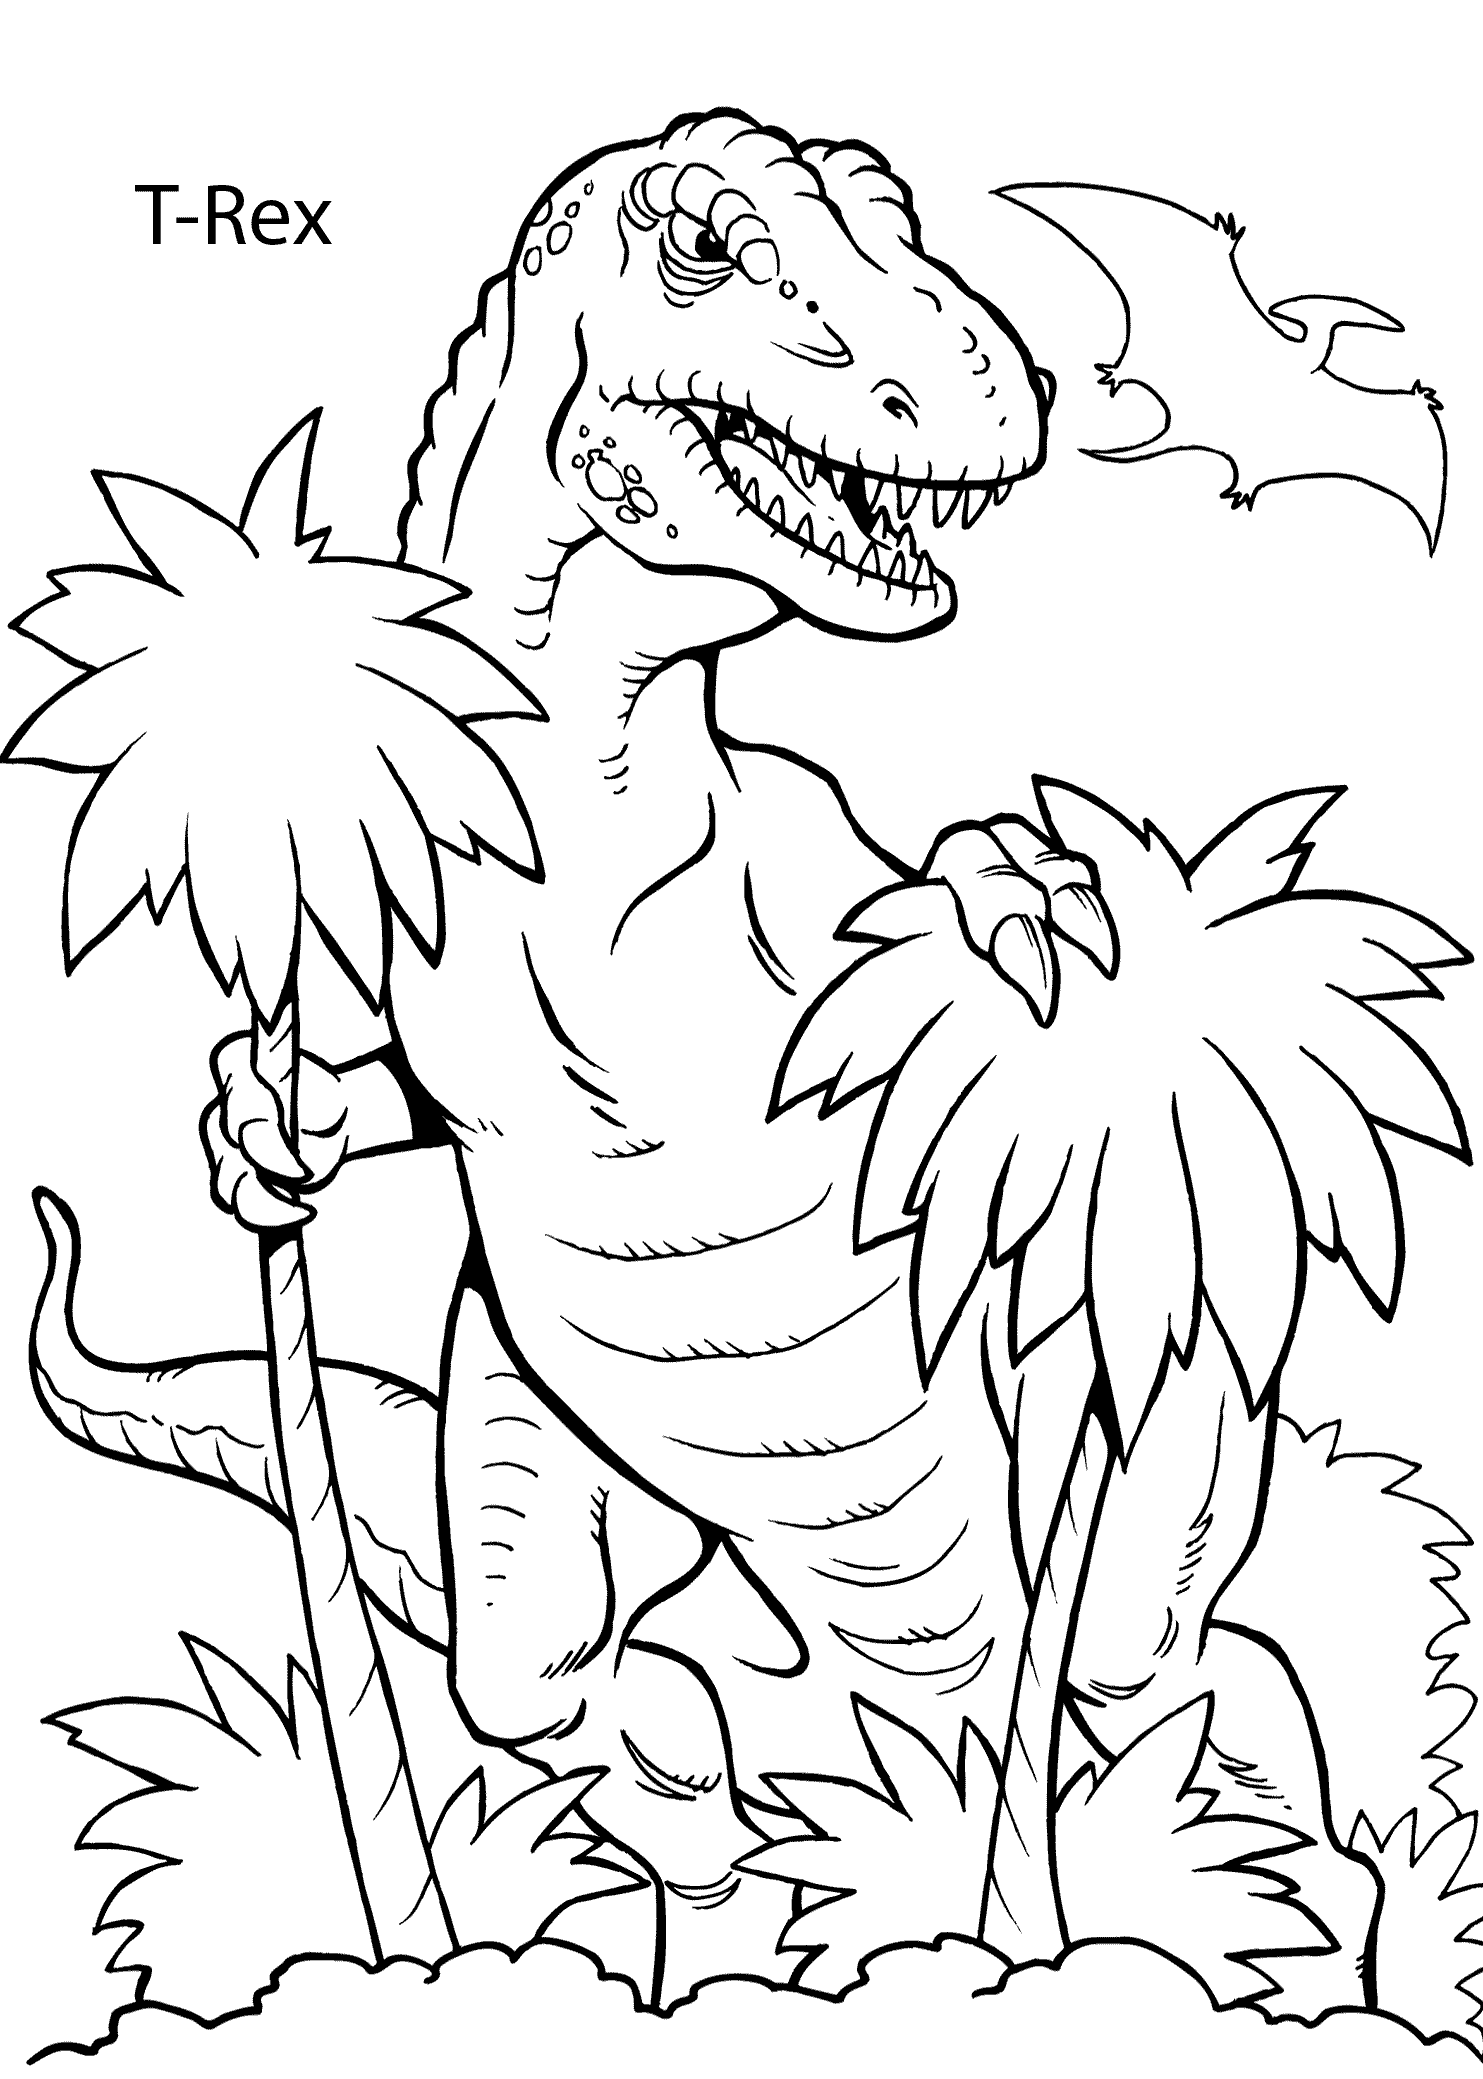 T-Rex dinosaur coloring pages for kids, printable free ...